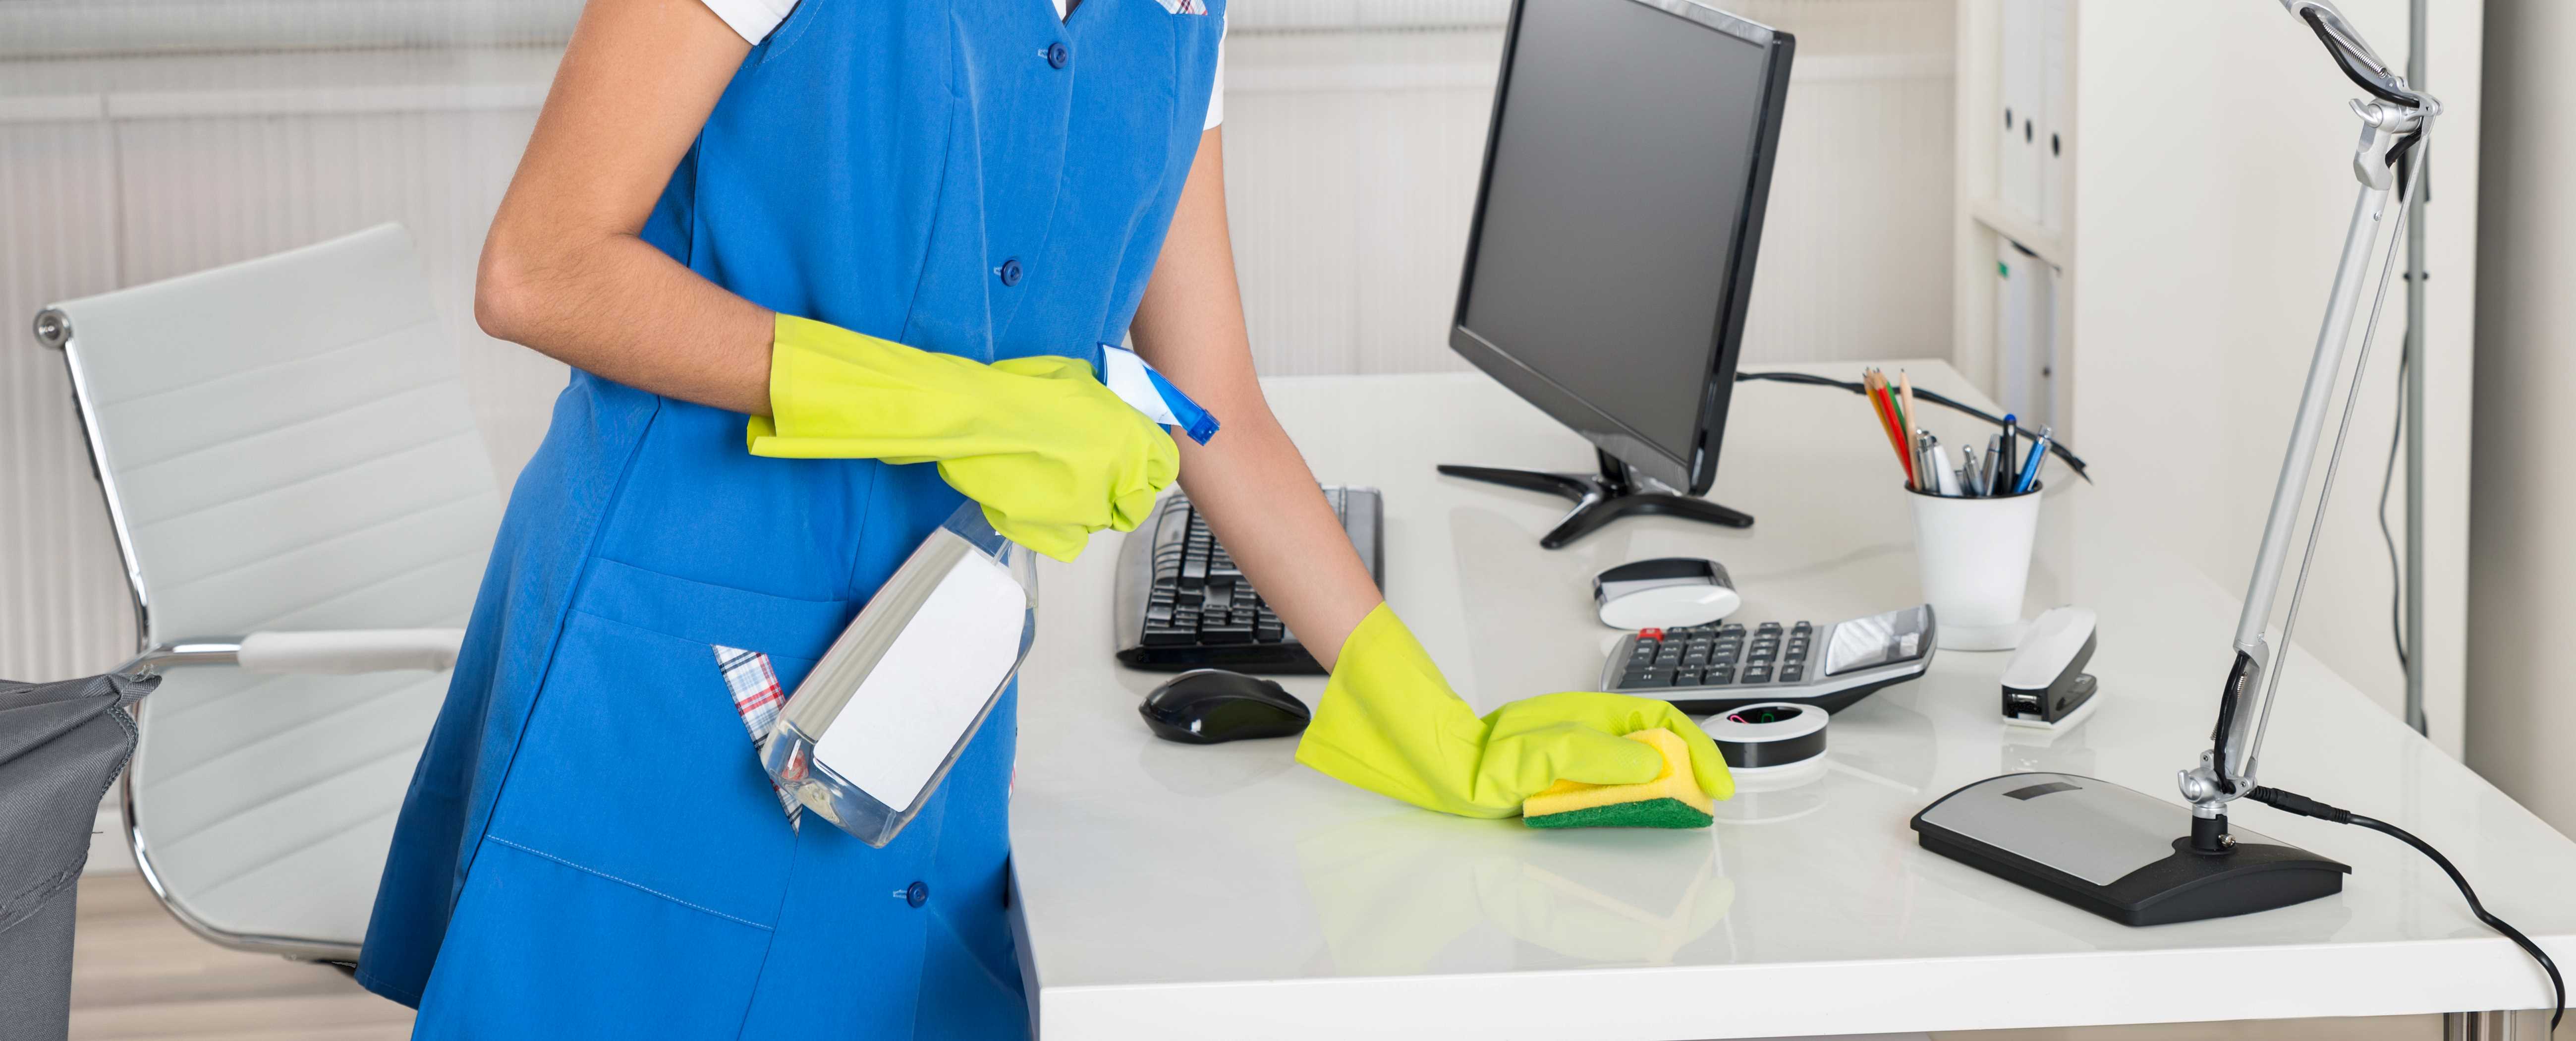 Why Hire Janitorial Services in Springfield Missouri